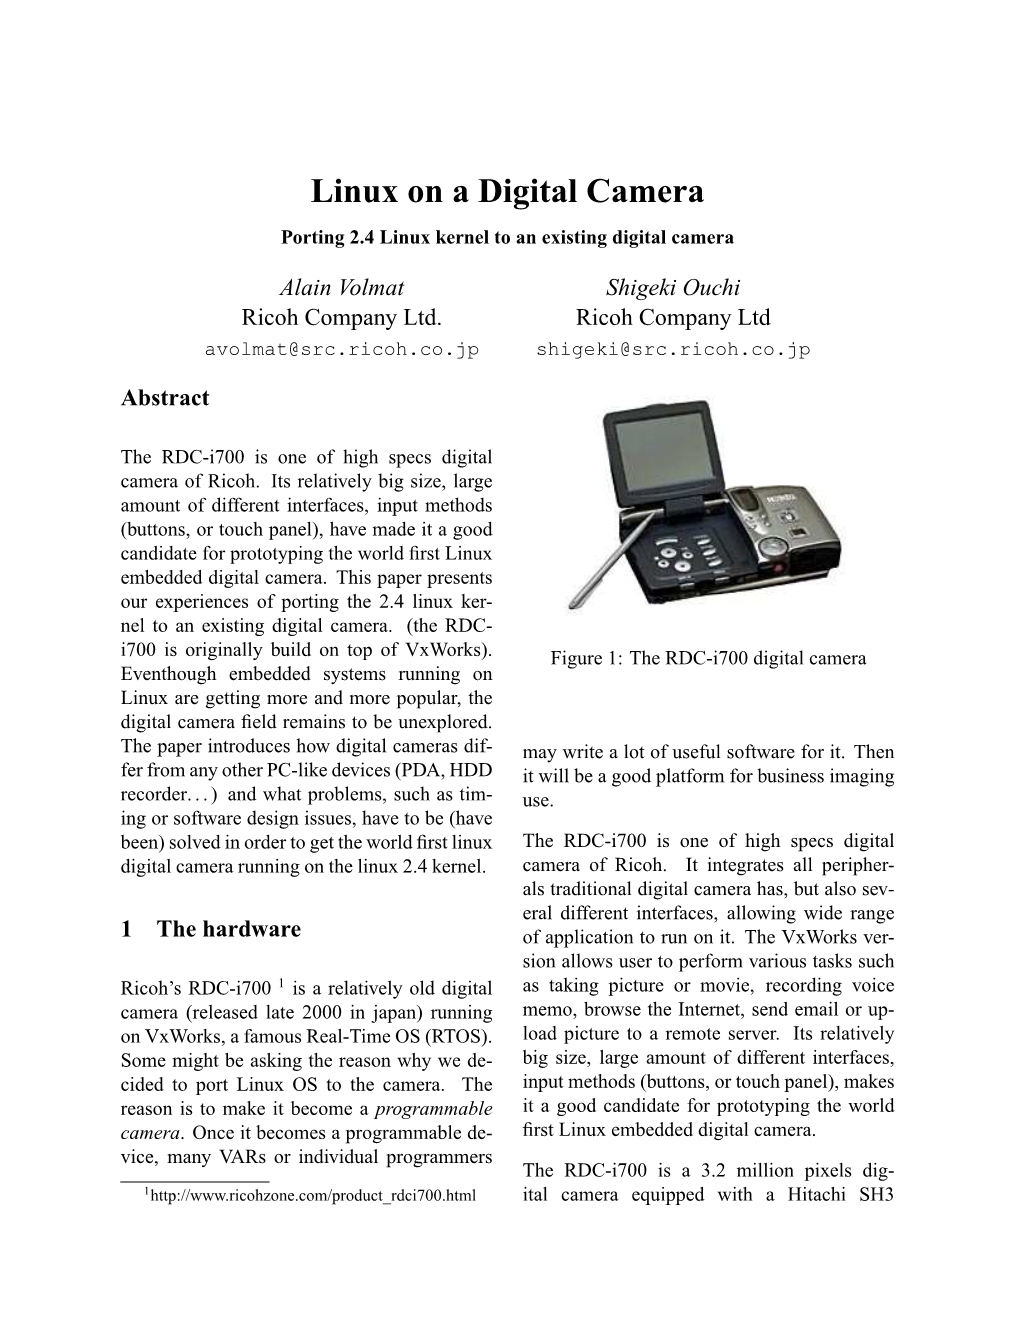 Linux on a Digital Camera Porting 2.4 Linux Kernel to an Existing Digital Camera